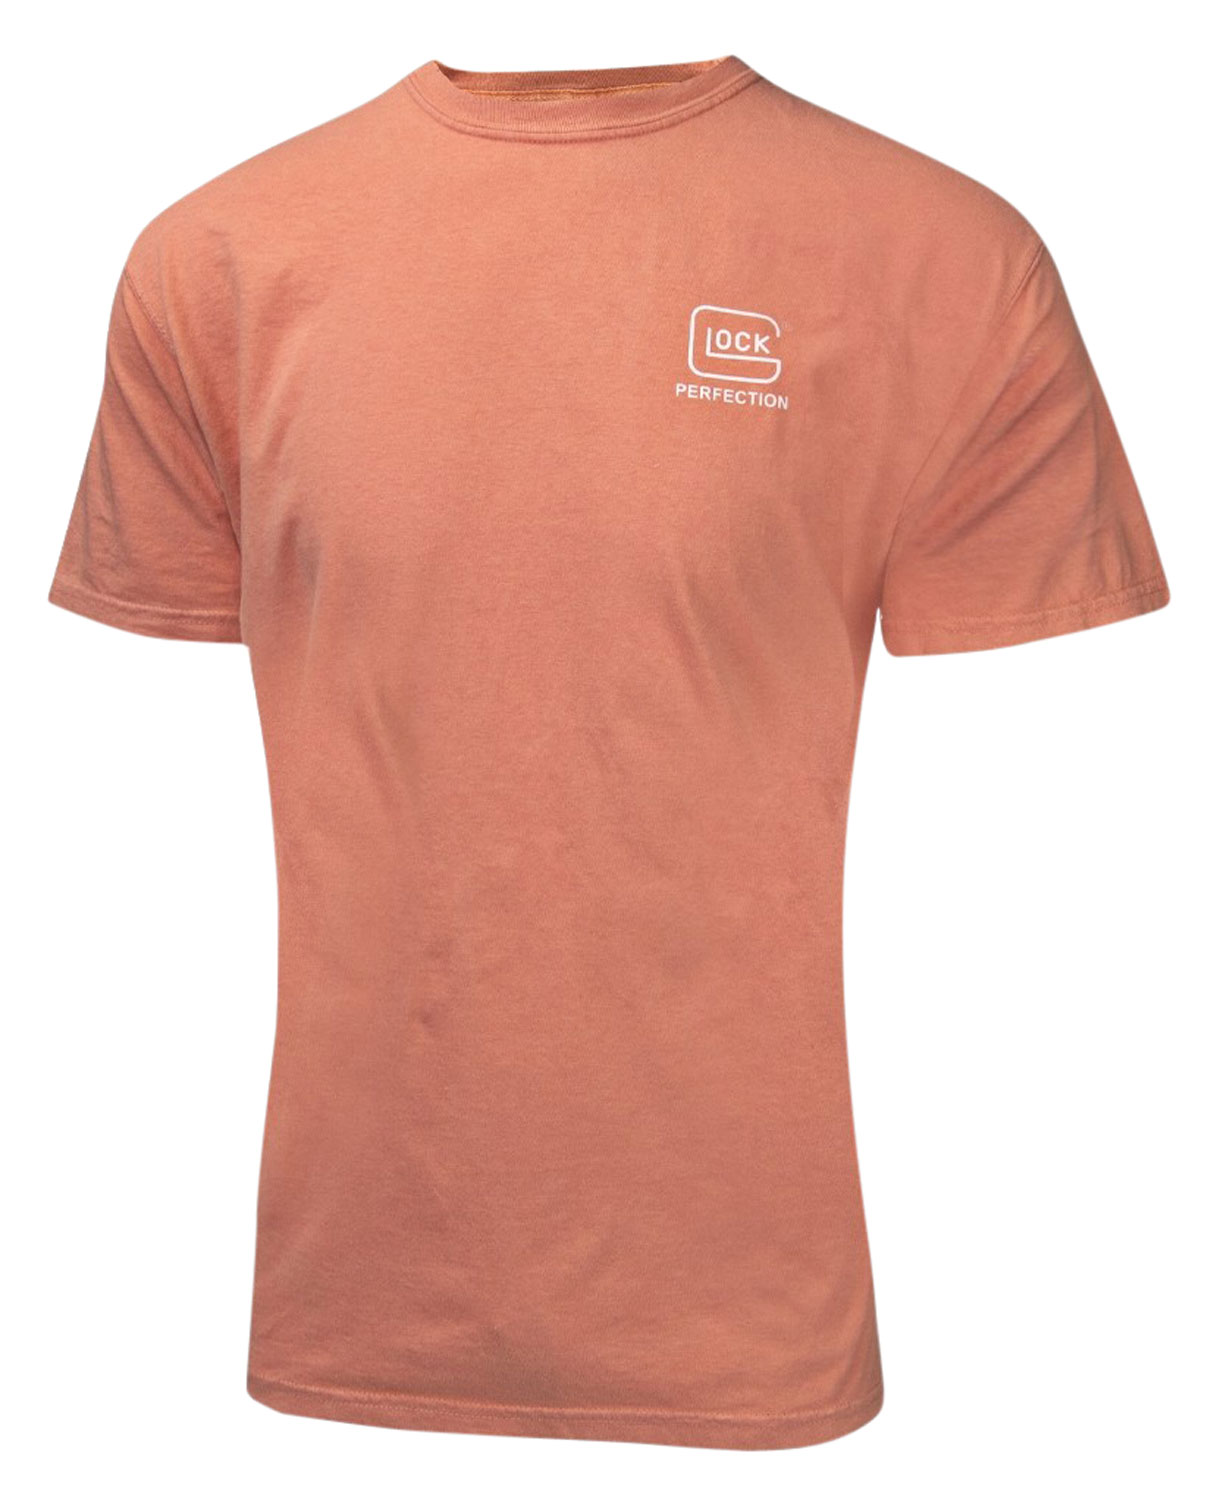 Glock AA75134 Crossover  Coral Cotton Short Sleeve XL